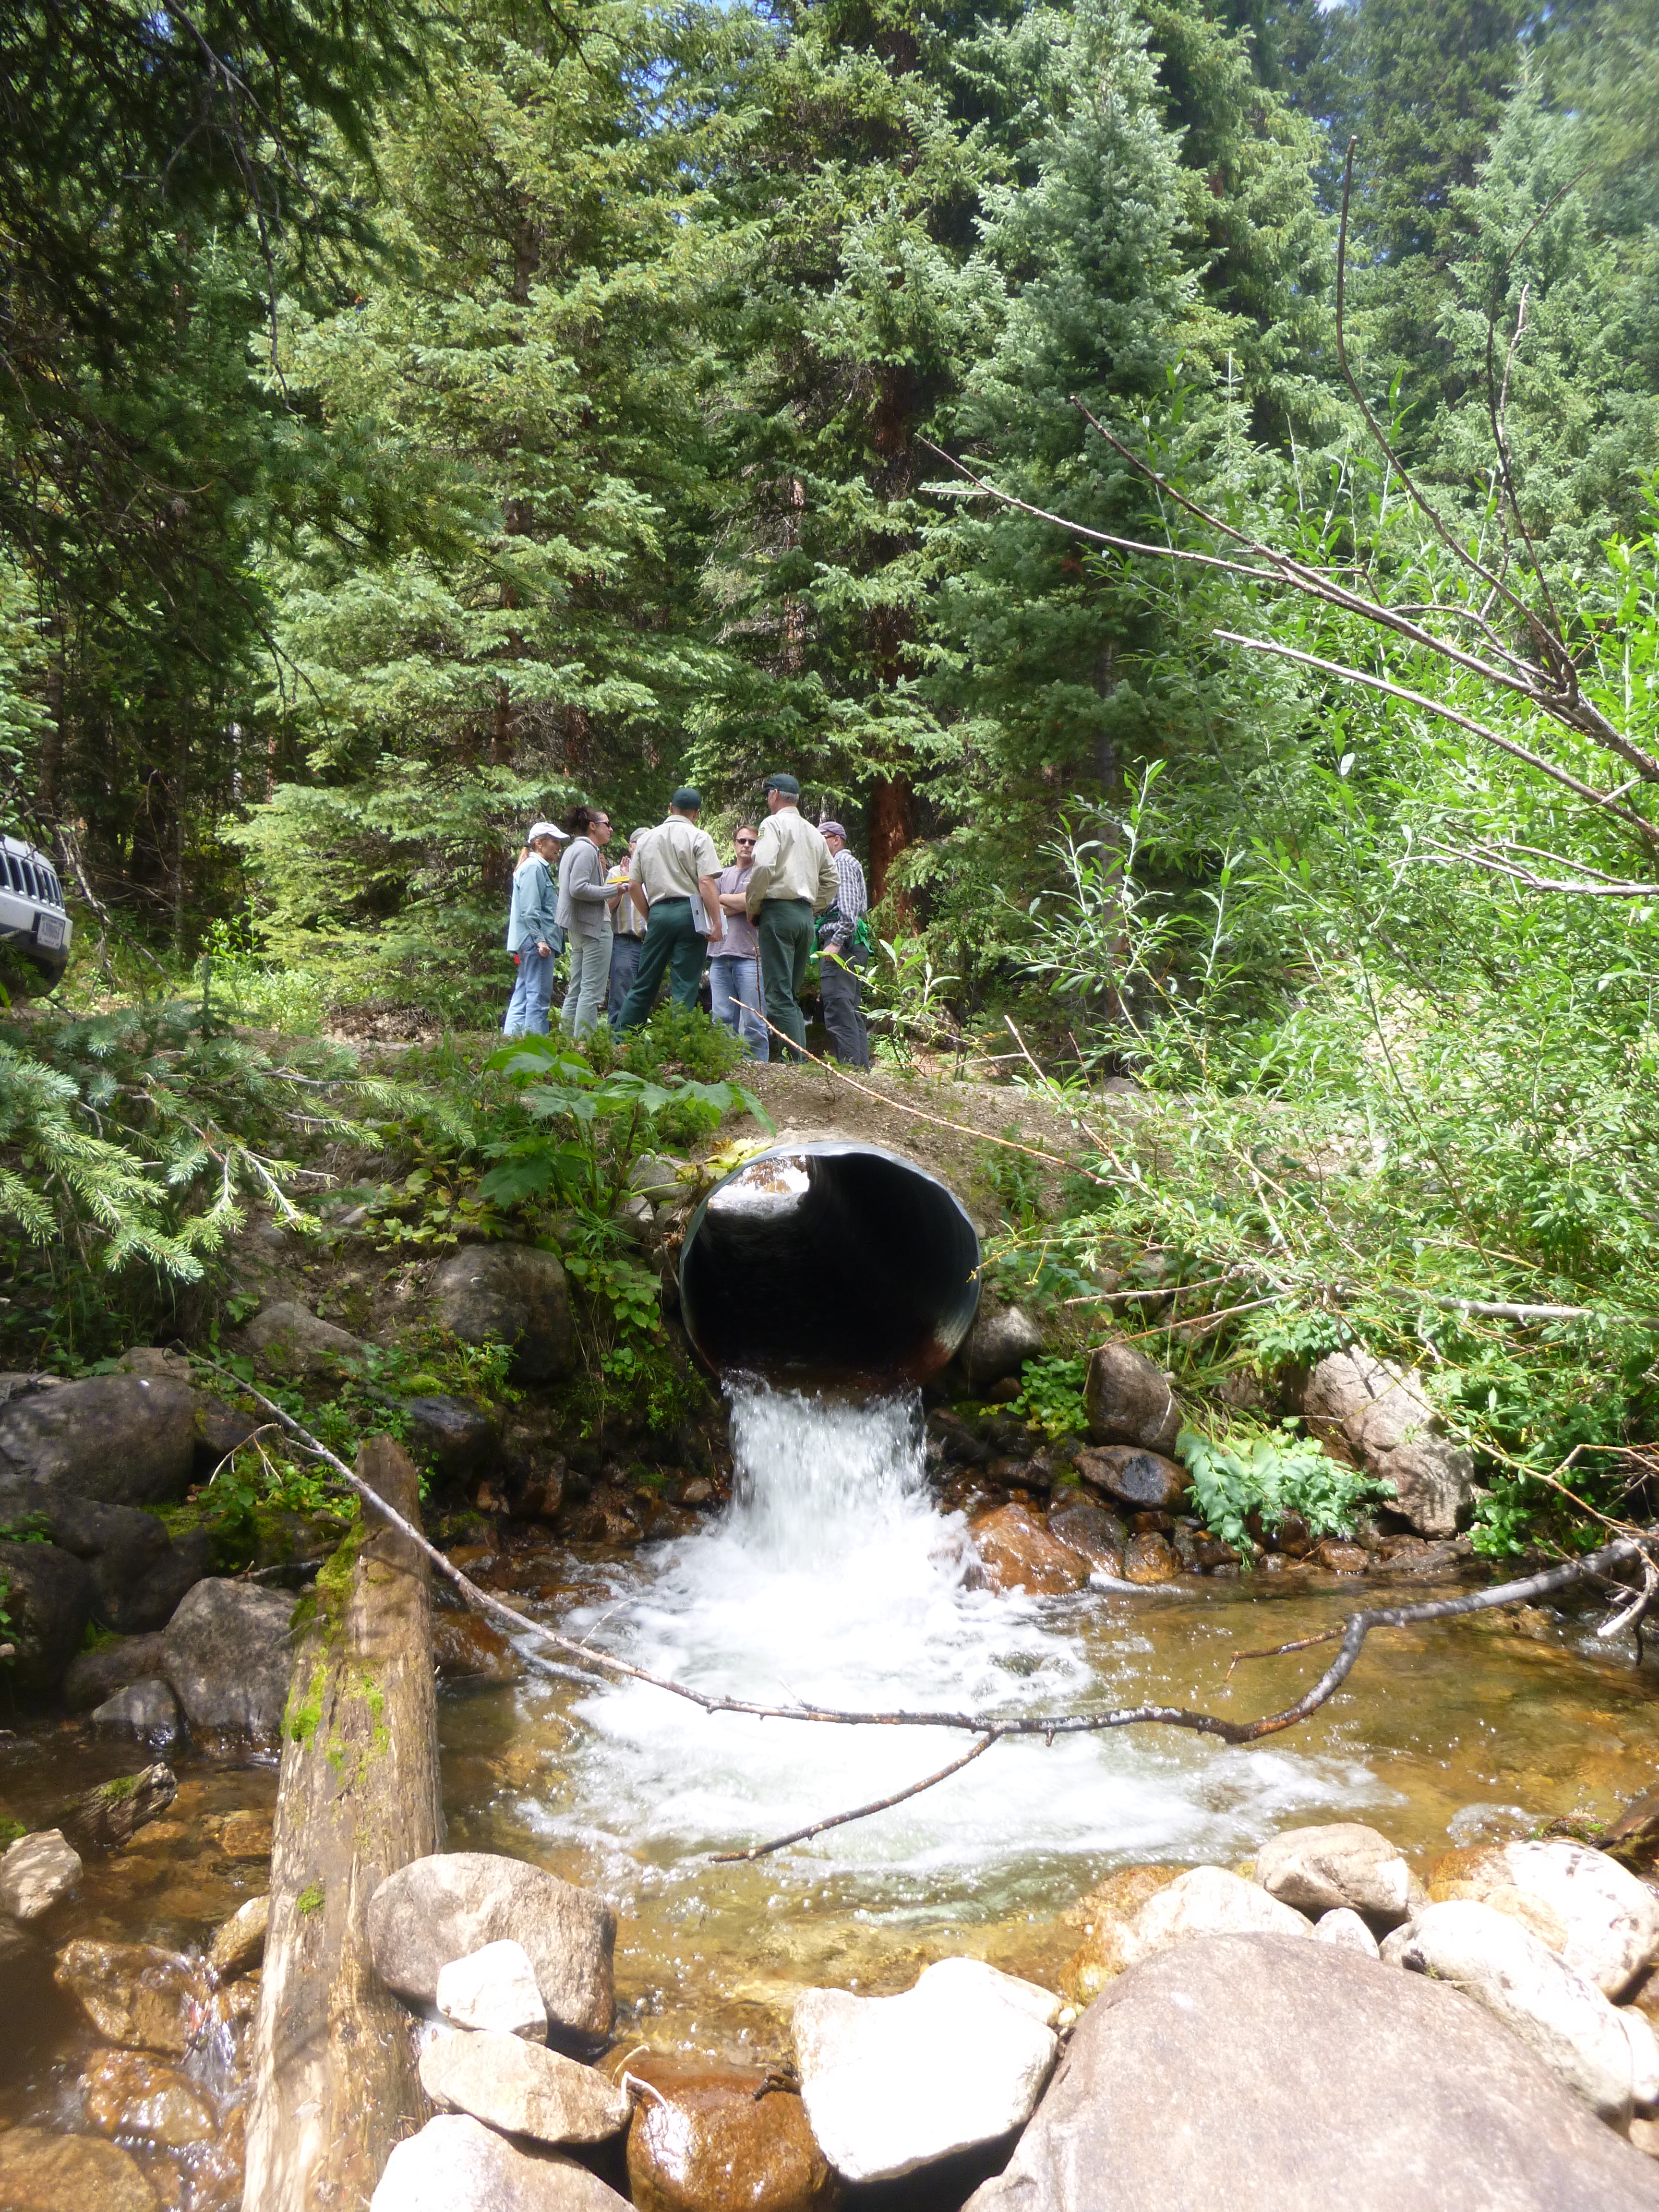 Crews with Denver Water and the U.S. Forest Service meet prior to removal of a traditional culvert that will be replaced with an "aquatic organism passage." The new passage will make movement easier and safer for small species, including boreal toads.